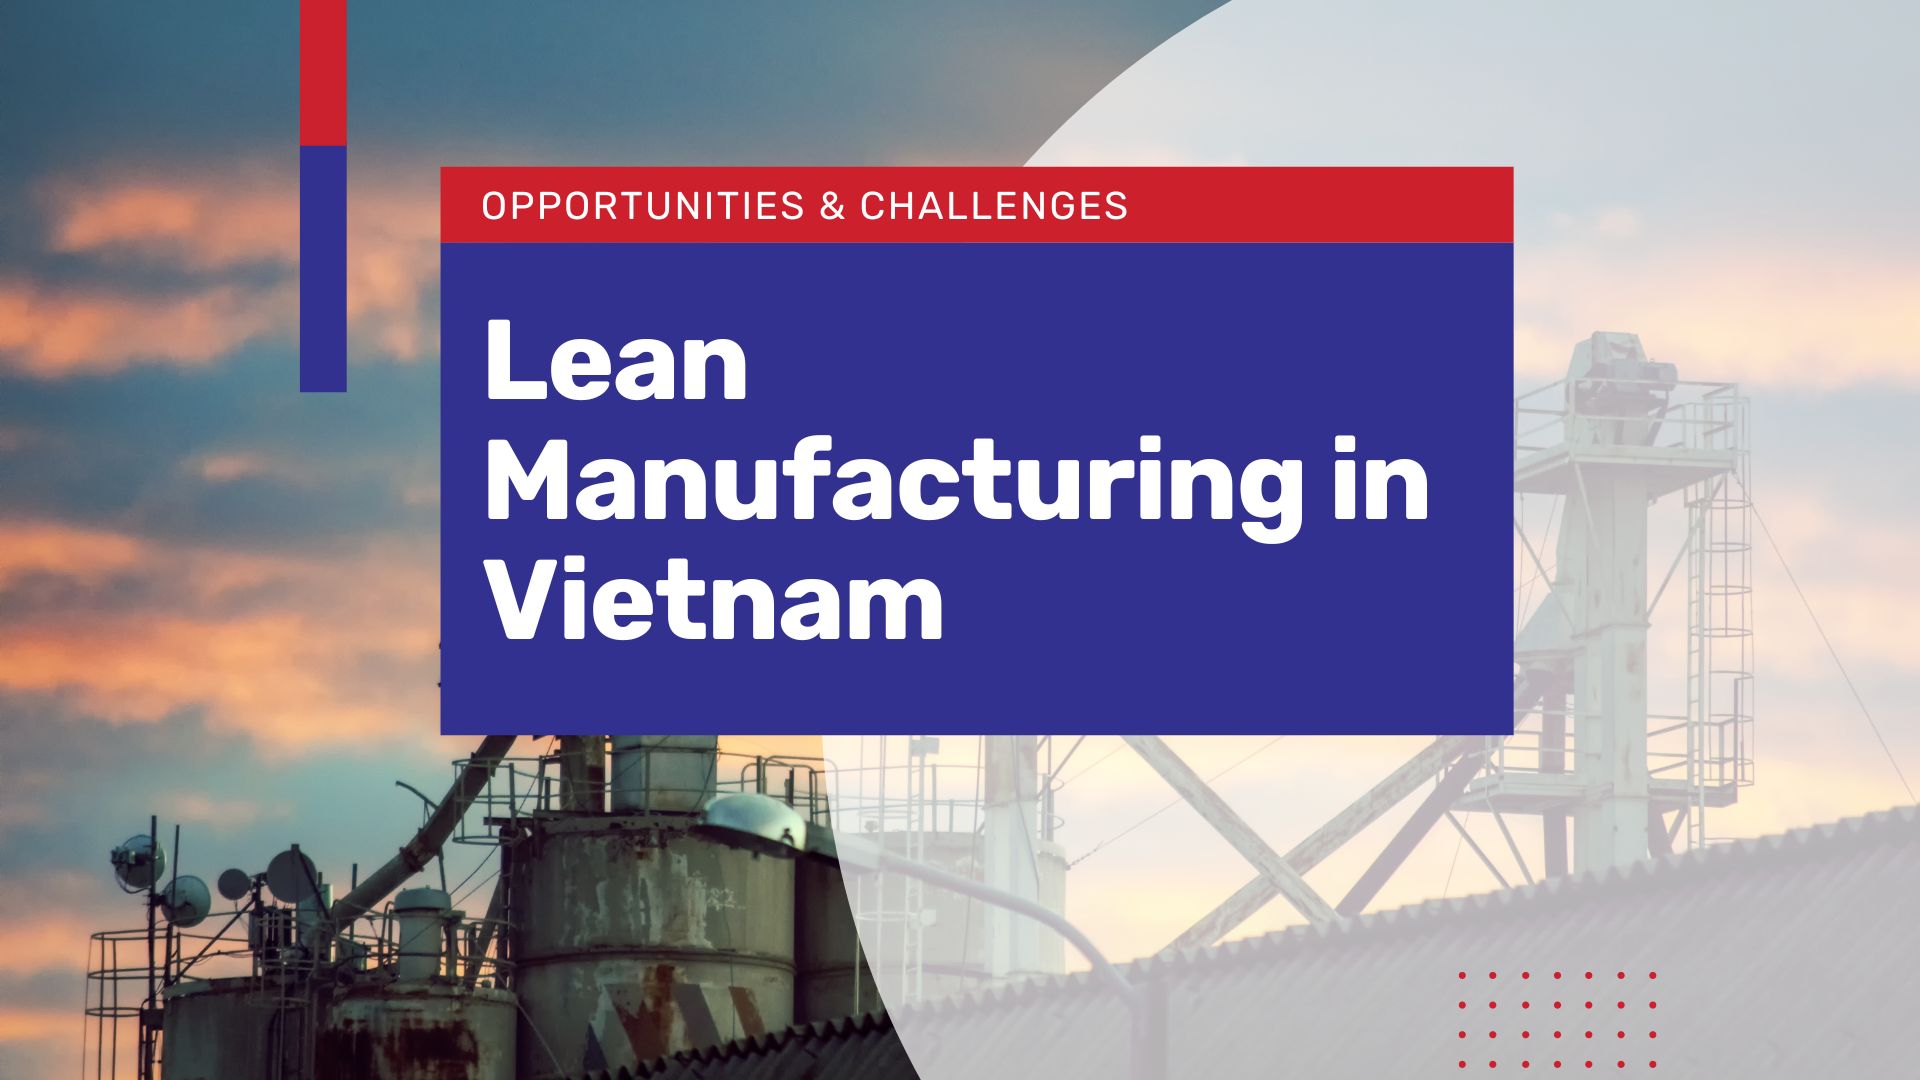 Lean manufacturing in Vietnam: opportunities and challenges